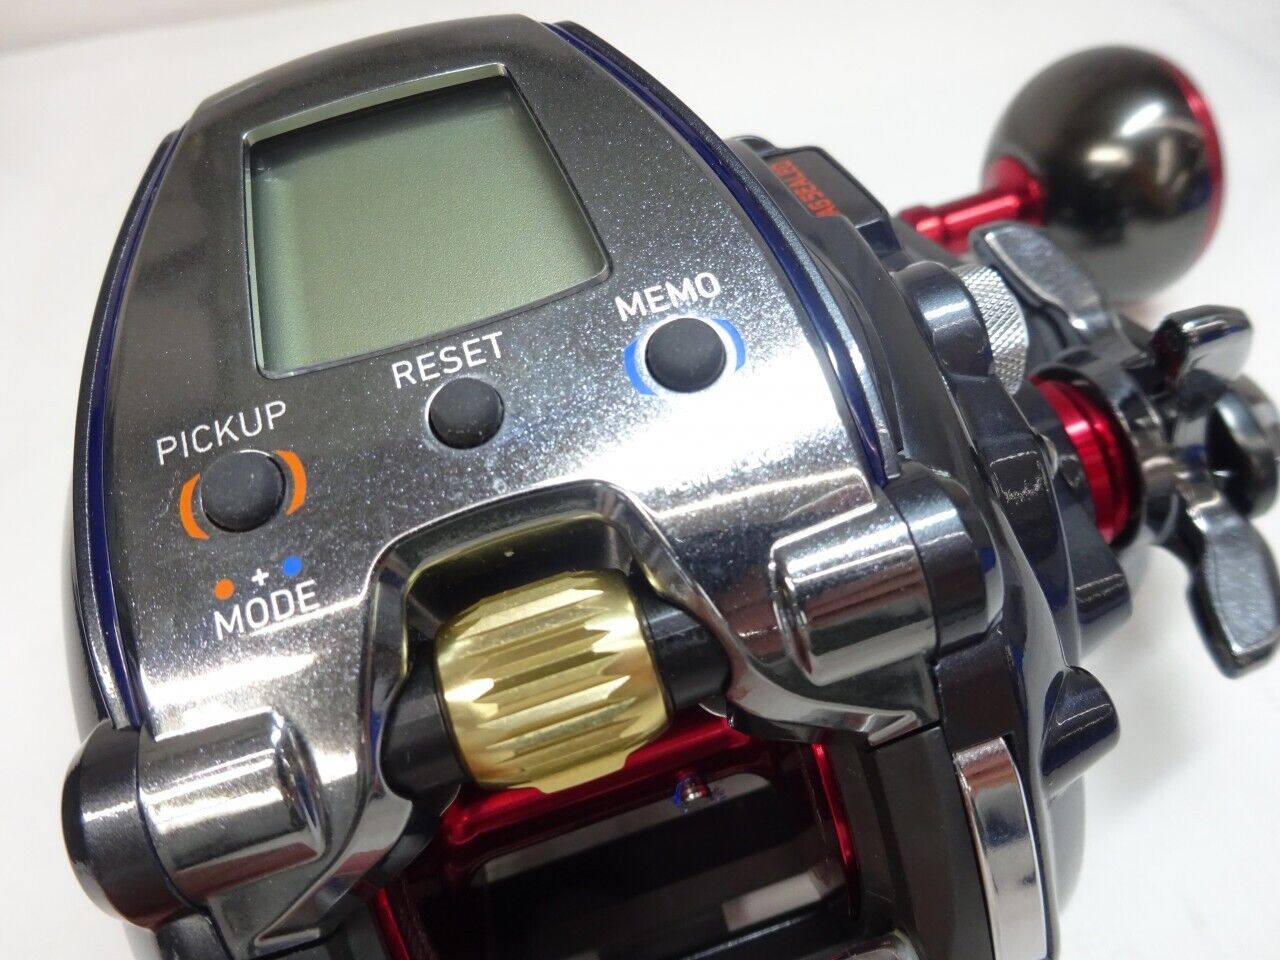 Daiwa 18 Seaborg 300J Electric Reel Right Handle Gear Ratio 4.7:1 F/S from JP